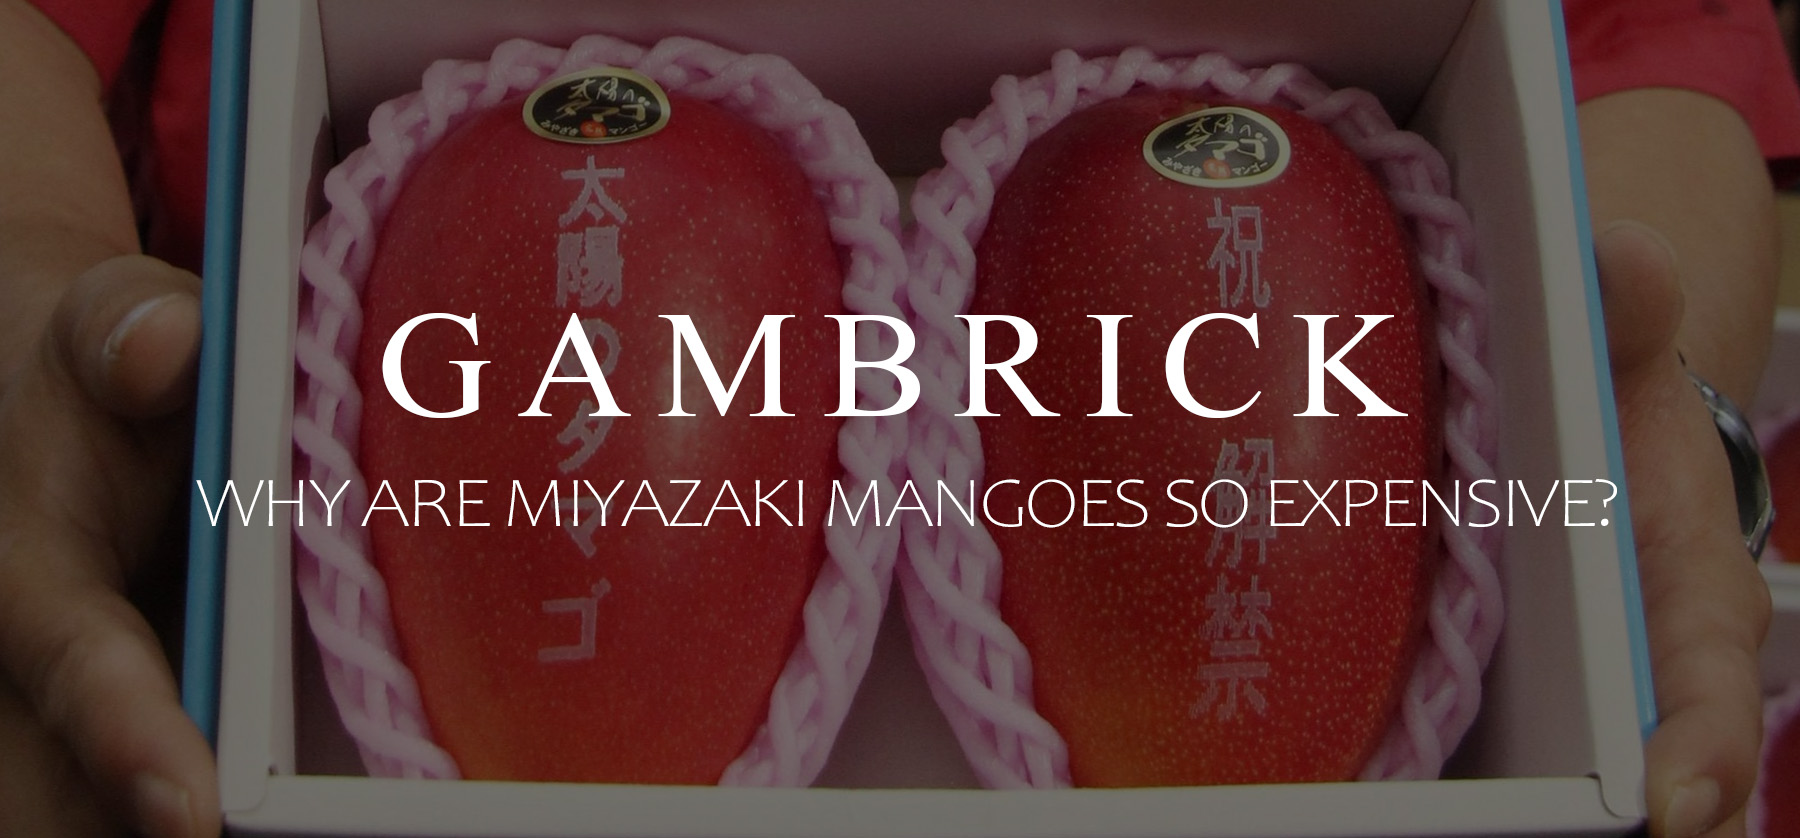 why are miyazaki mangoes so expensive banner